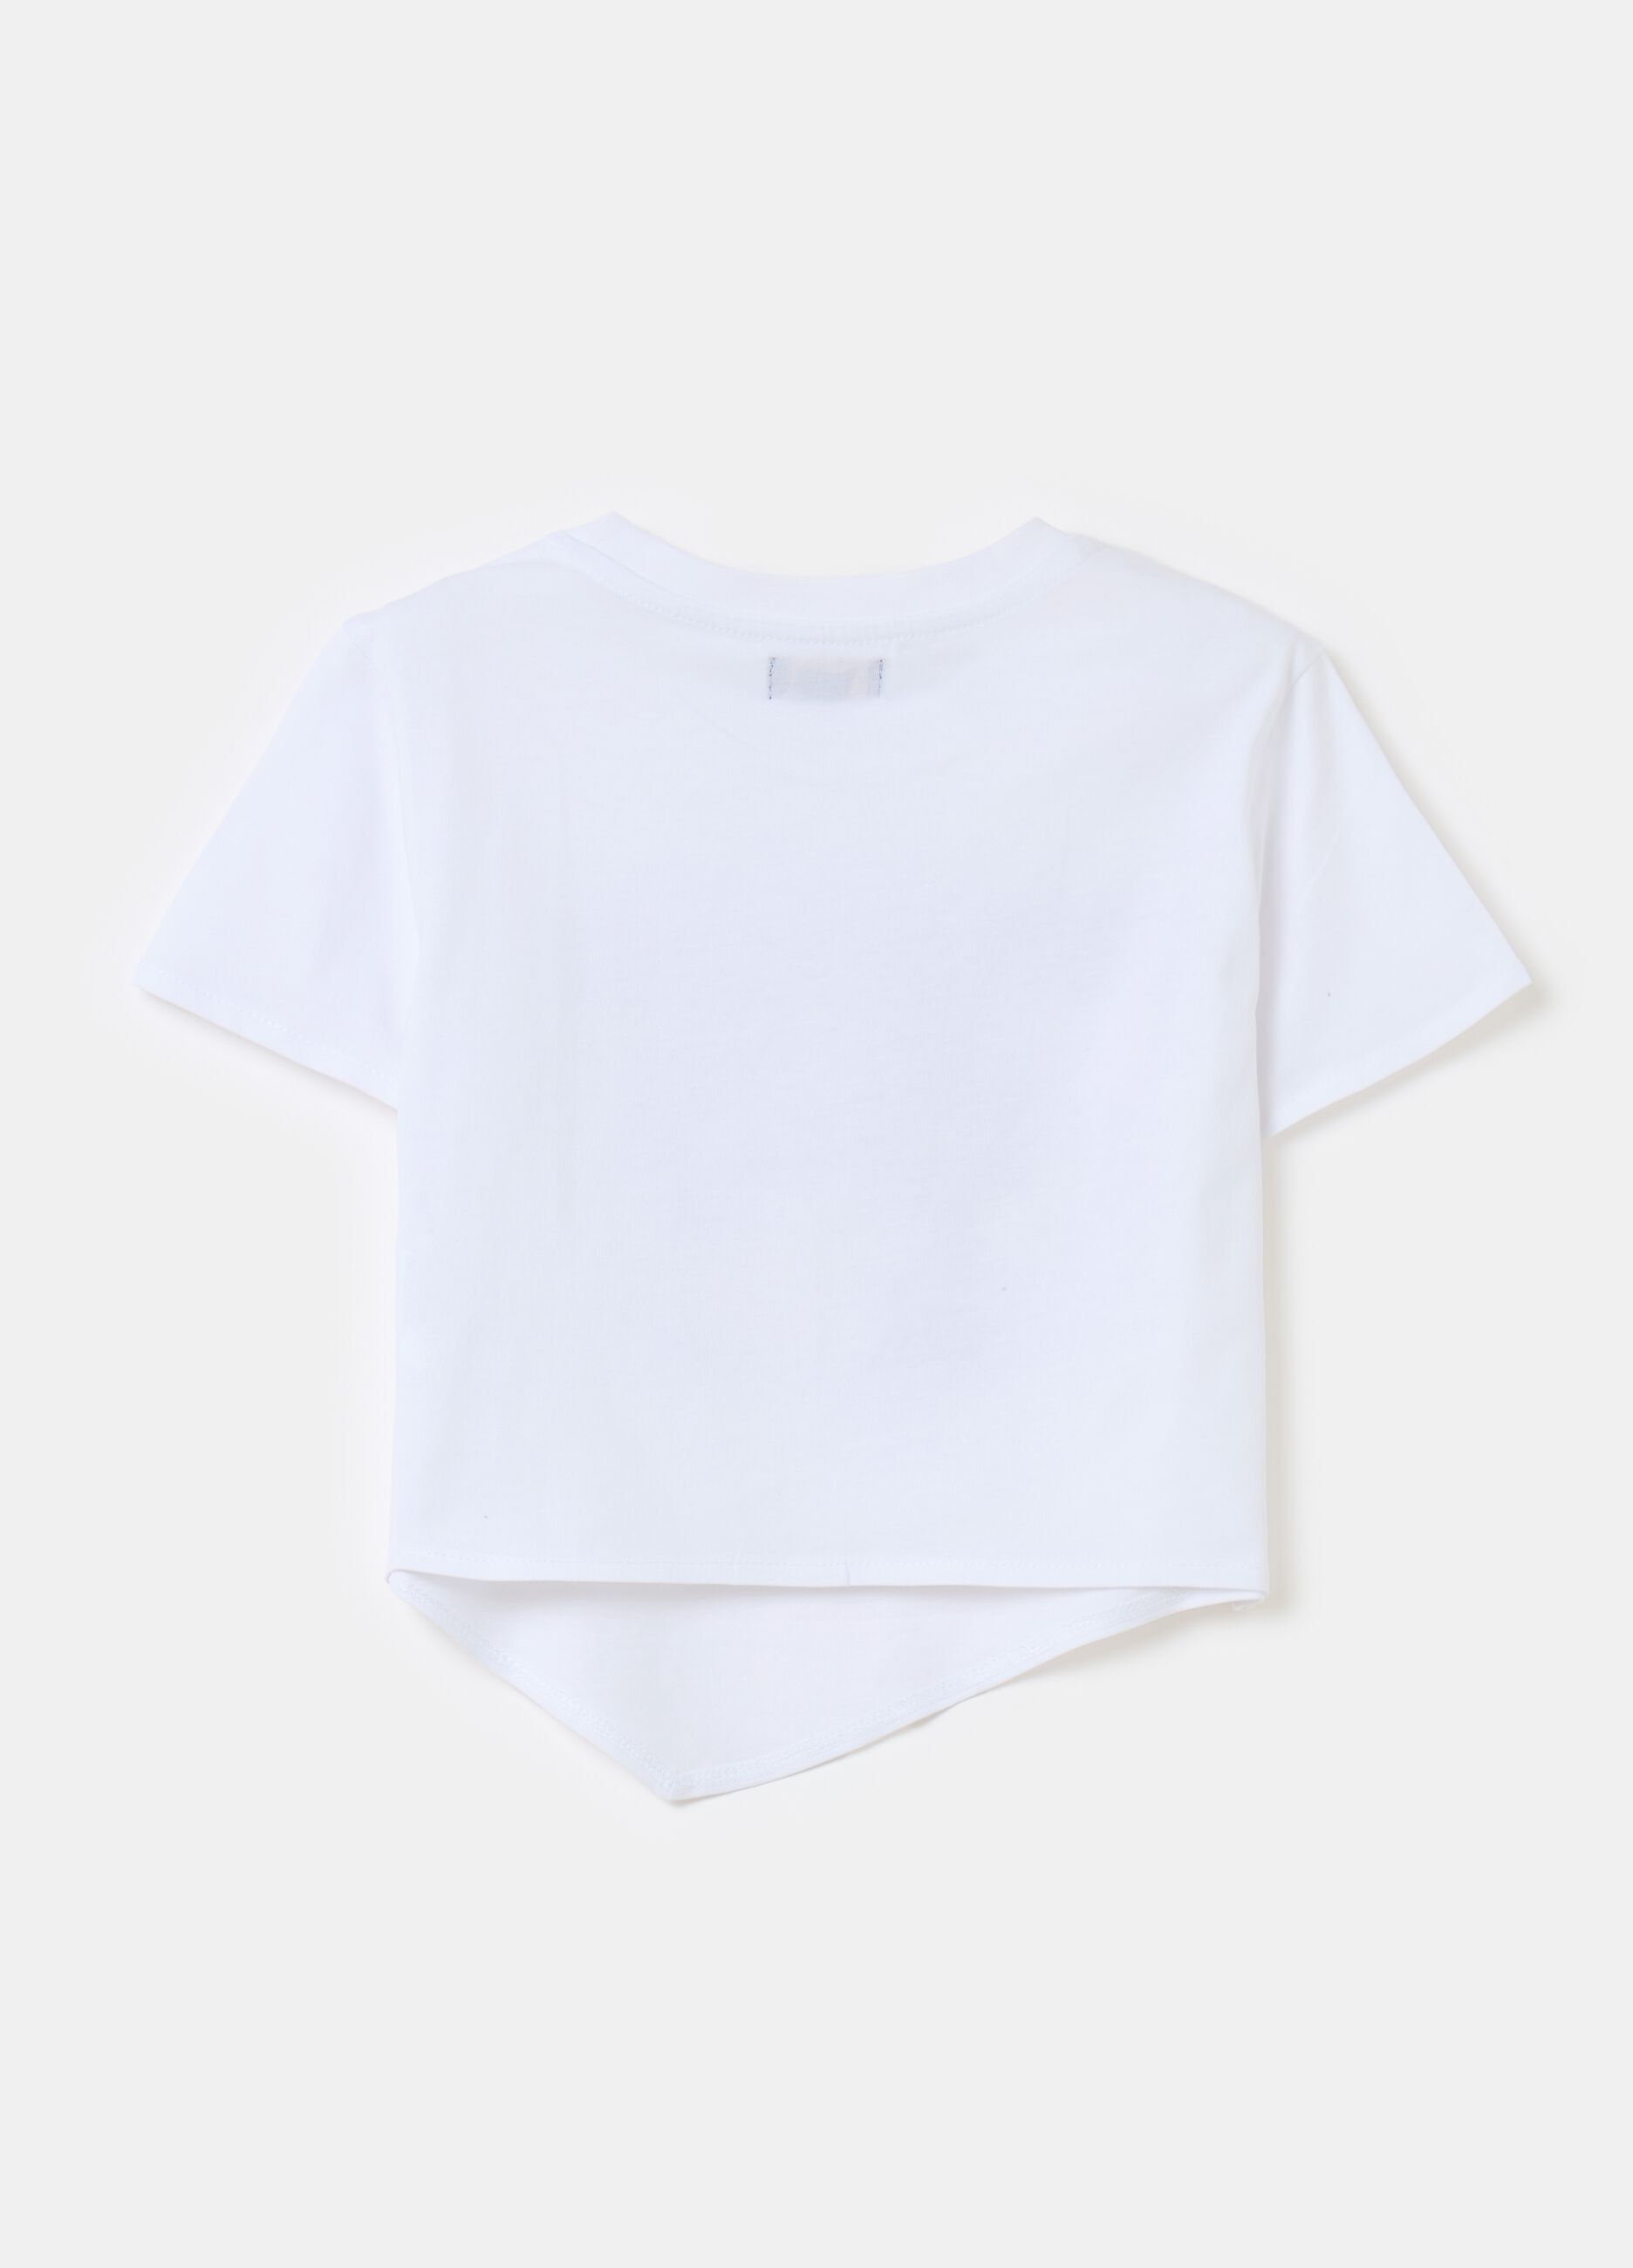 Asymmetric T-shirt in cotton with print